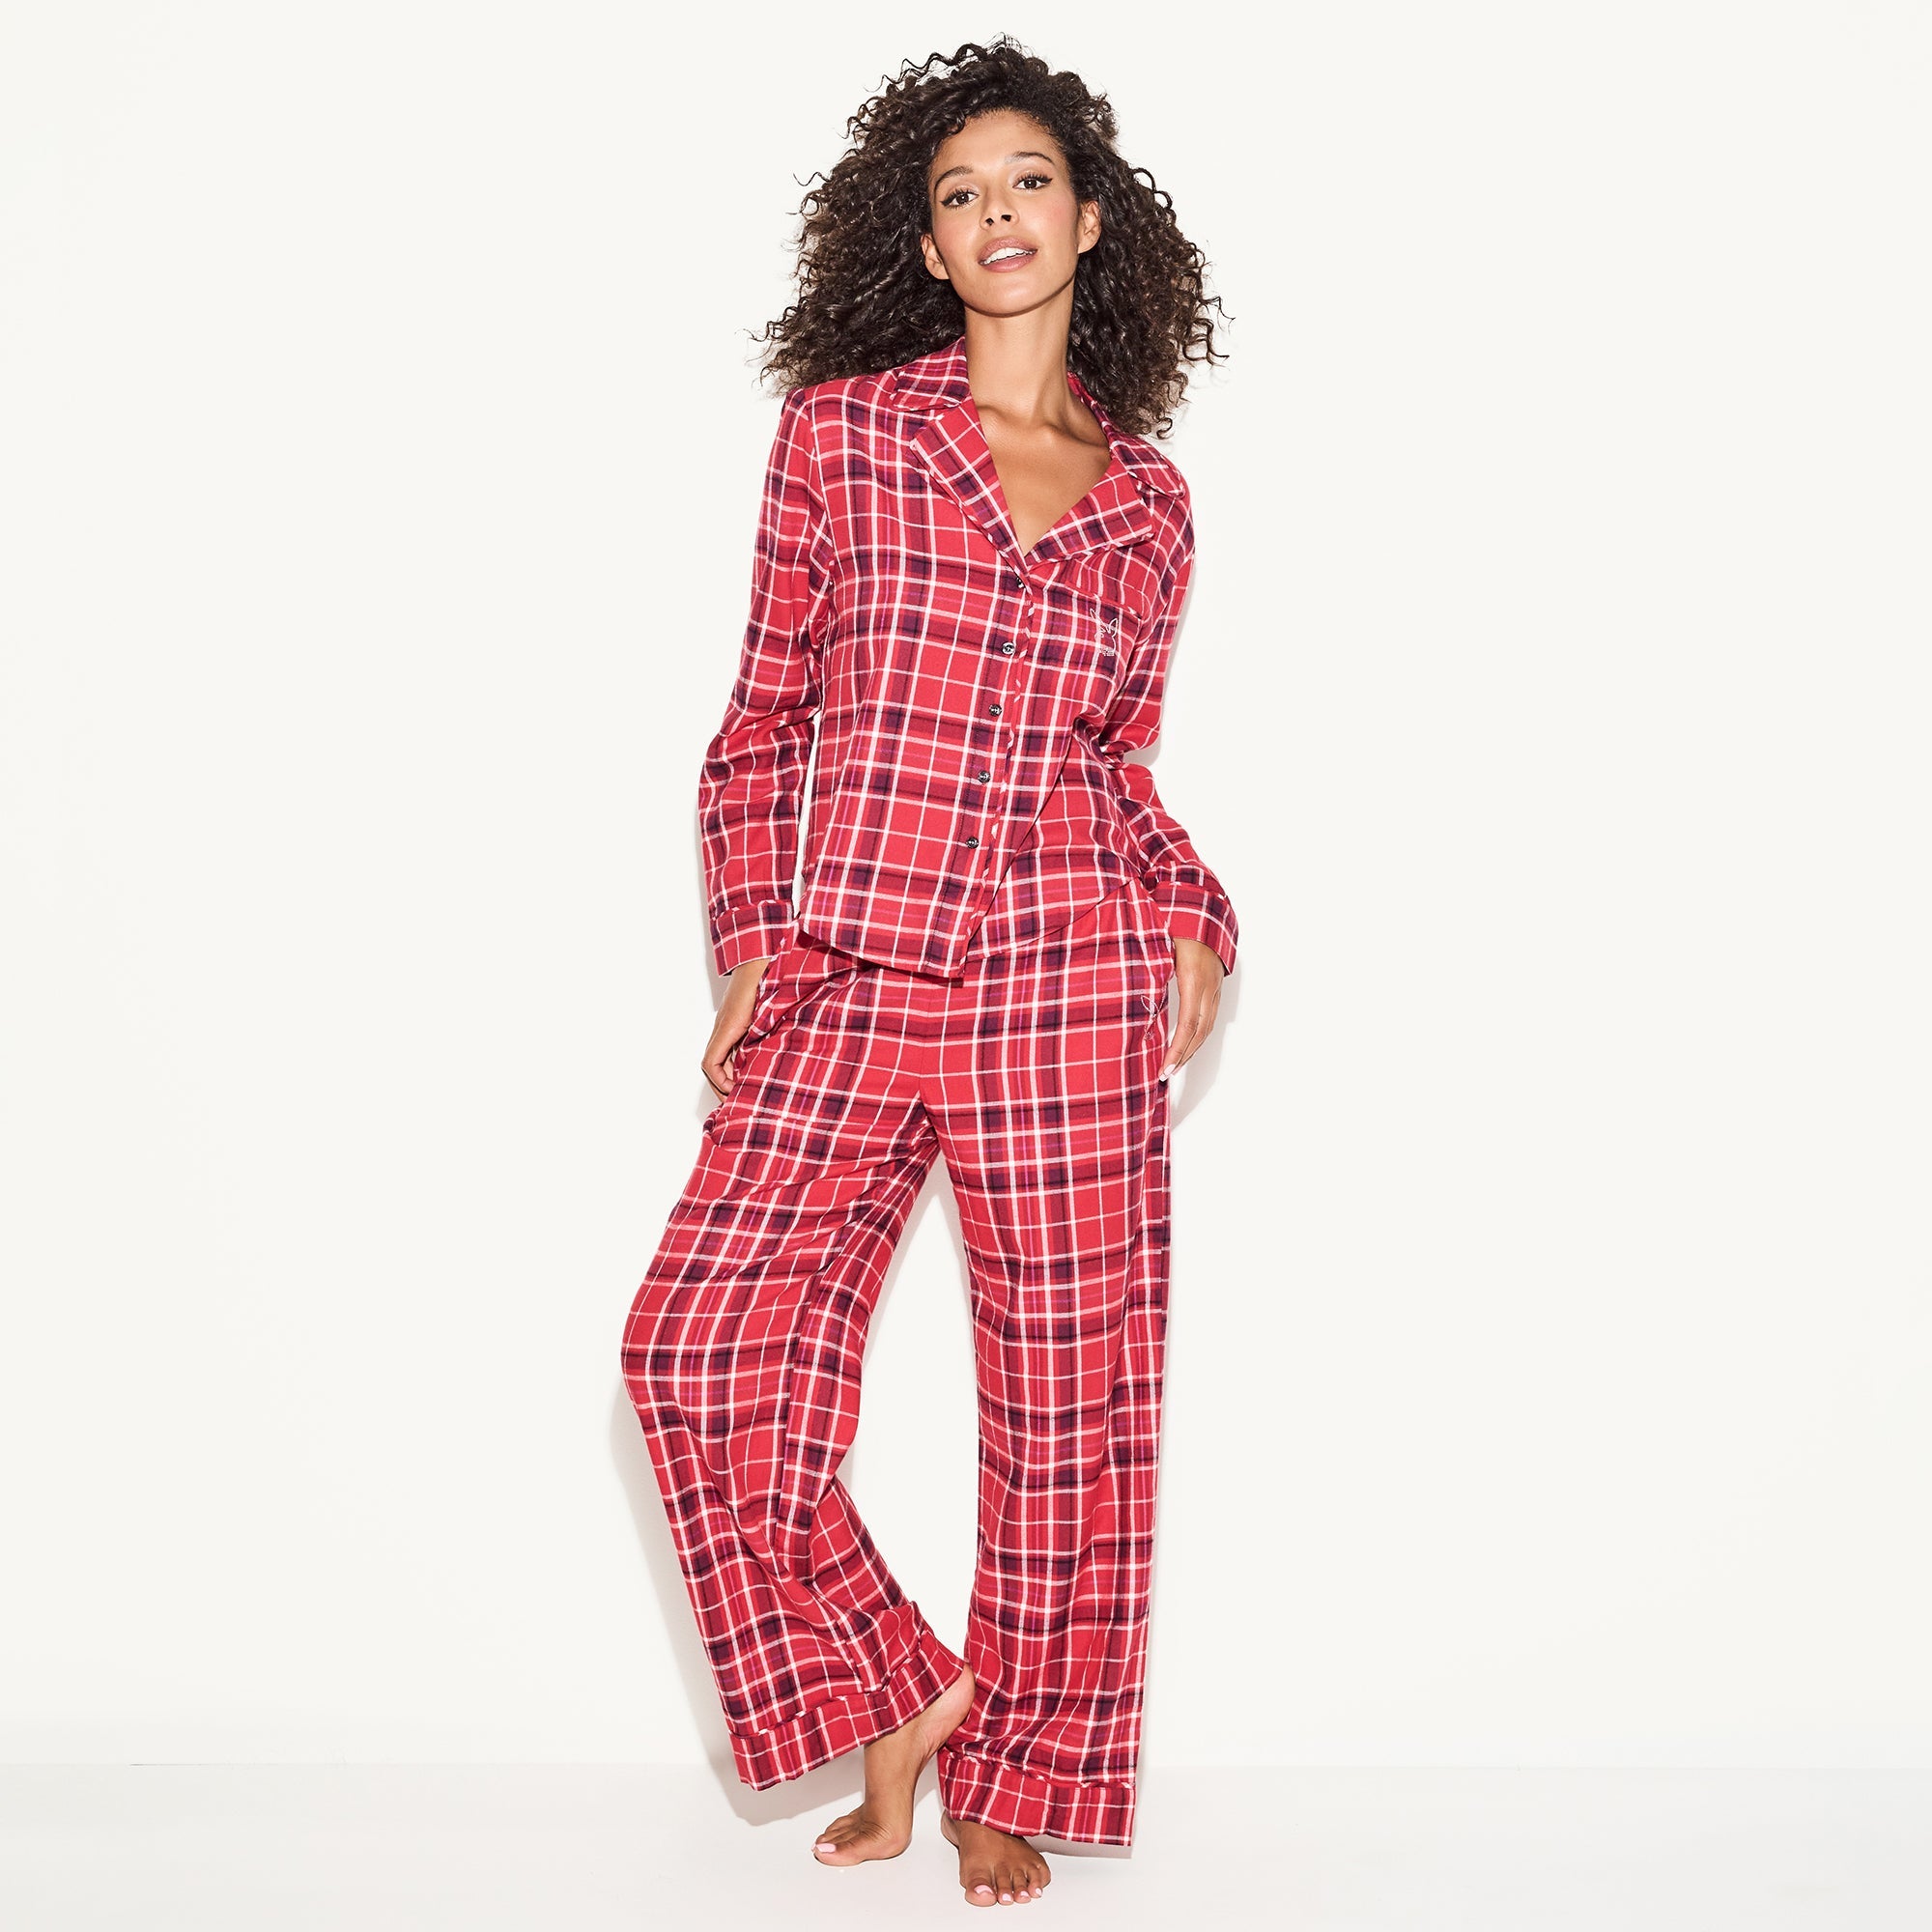 Red Flannel Pajama Shirt: Captivating Playboy Sleep Shirt in Red Plaid